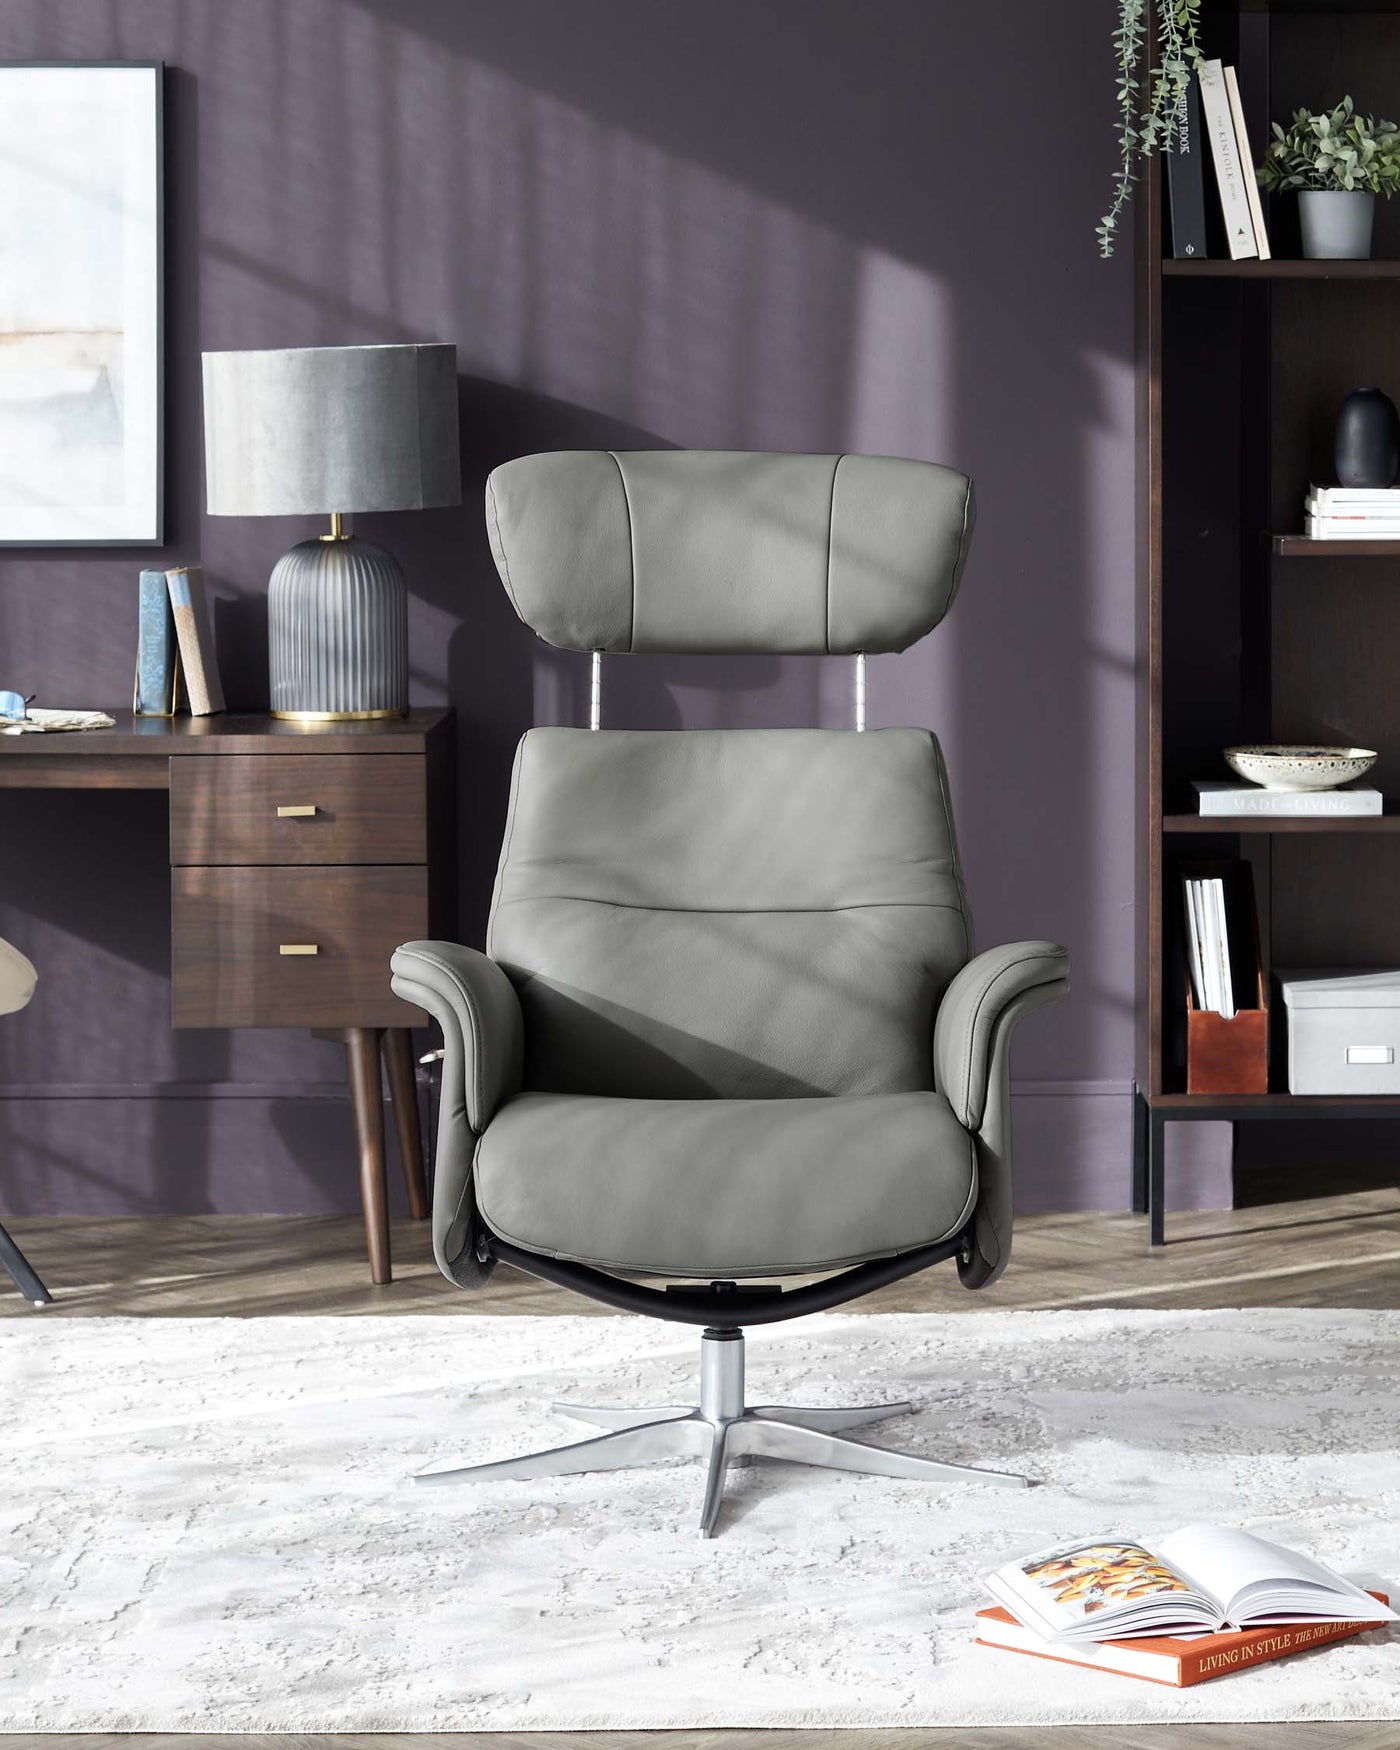 Modern charcoal-grey leather recliner with a high backrest and padded armrests featuring a swivel metal base, paired with a dark wood sideboard and shelving unit displaying decorative items and books, with a contemporary grey fabric table lamp on top of the sideboard.